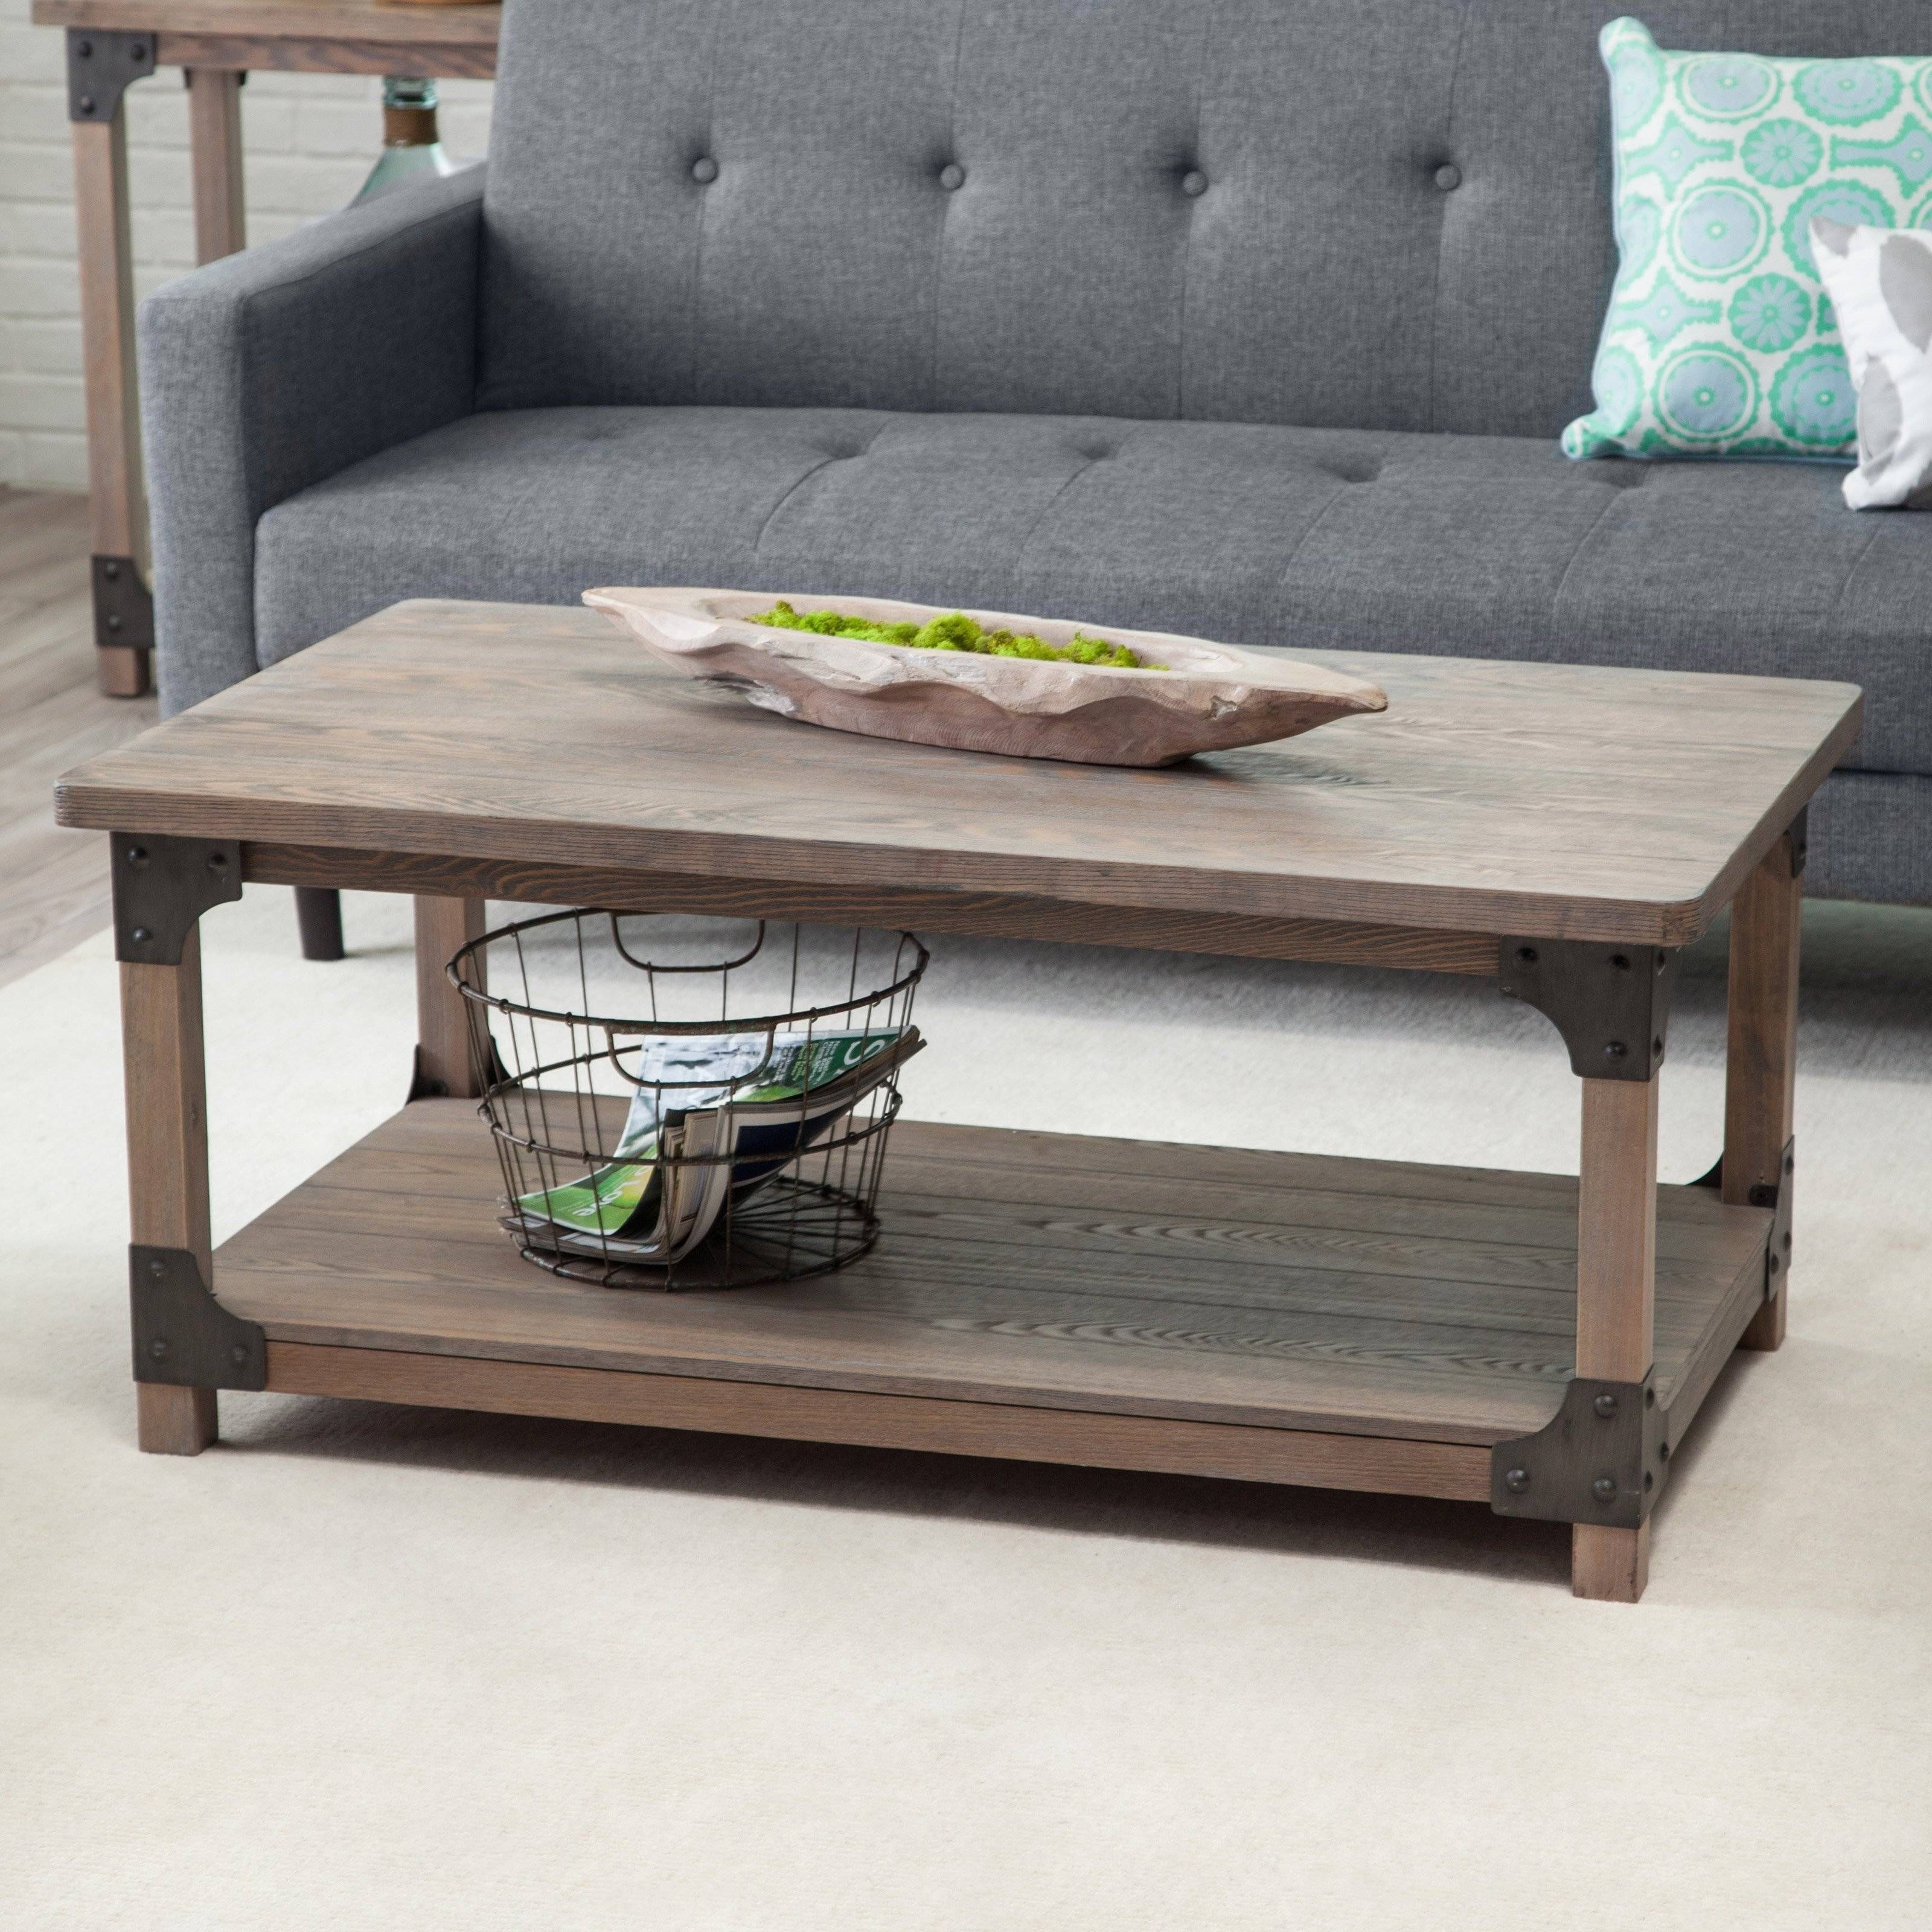 Emerald Home Chandler Cocktail Table | Hayneedle Throughout Rustic Looking Coffee Tables (View 8 of 15)